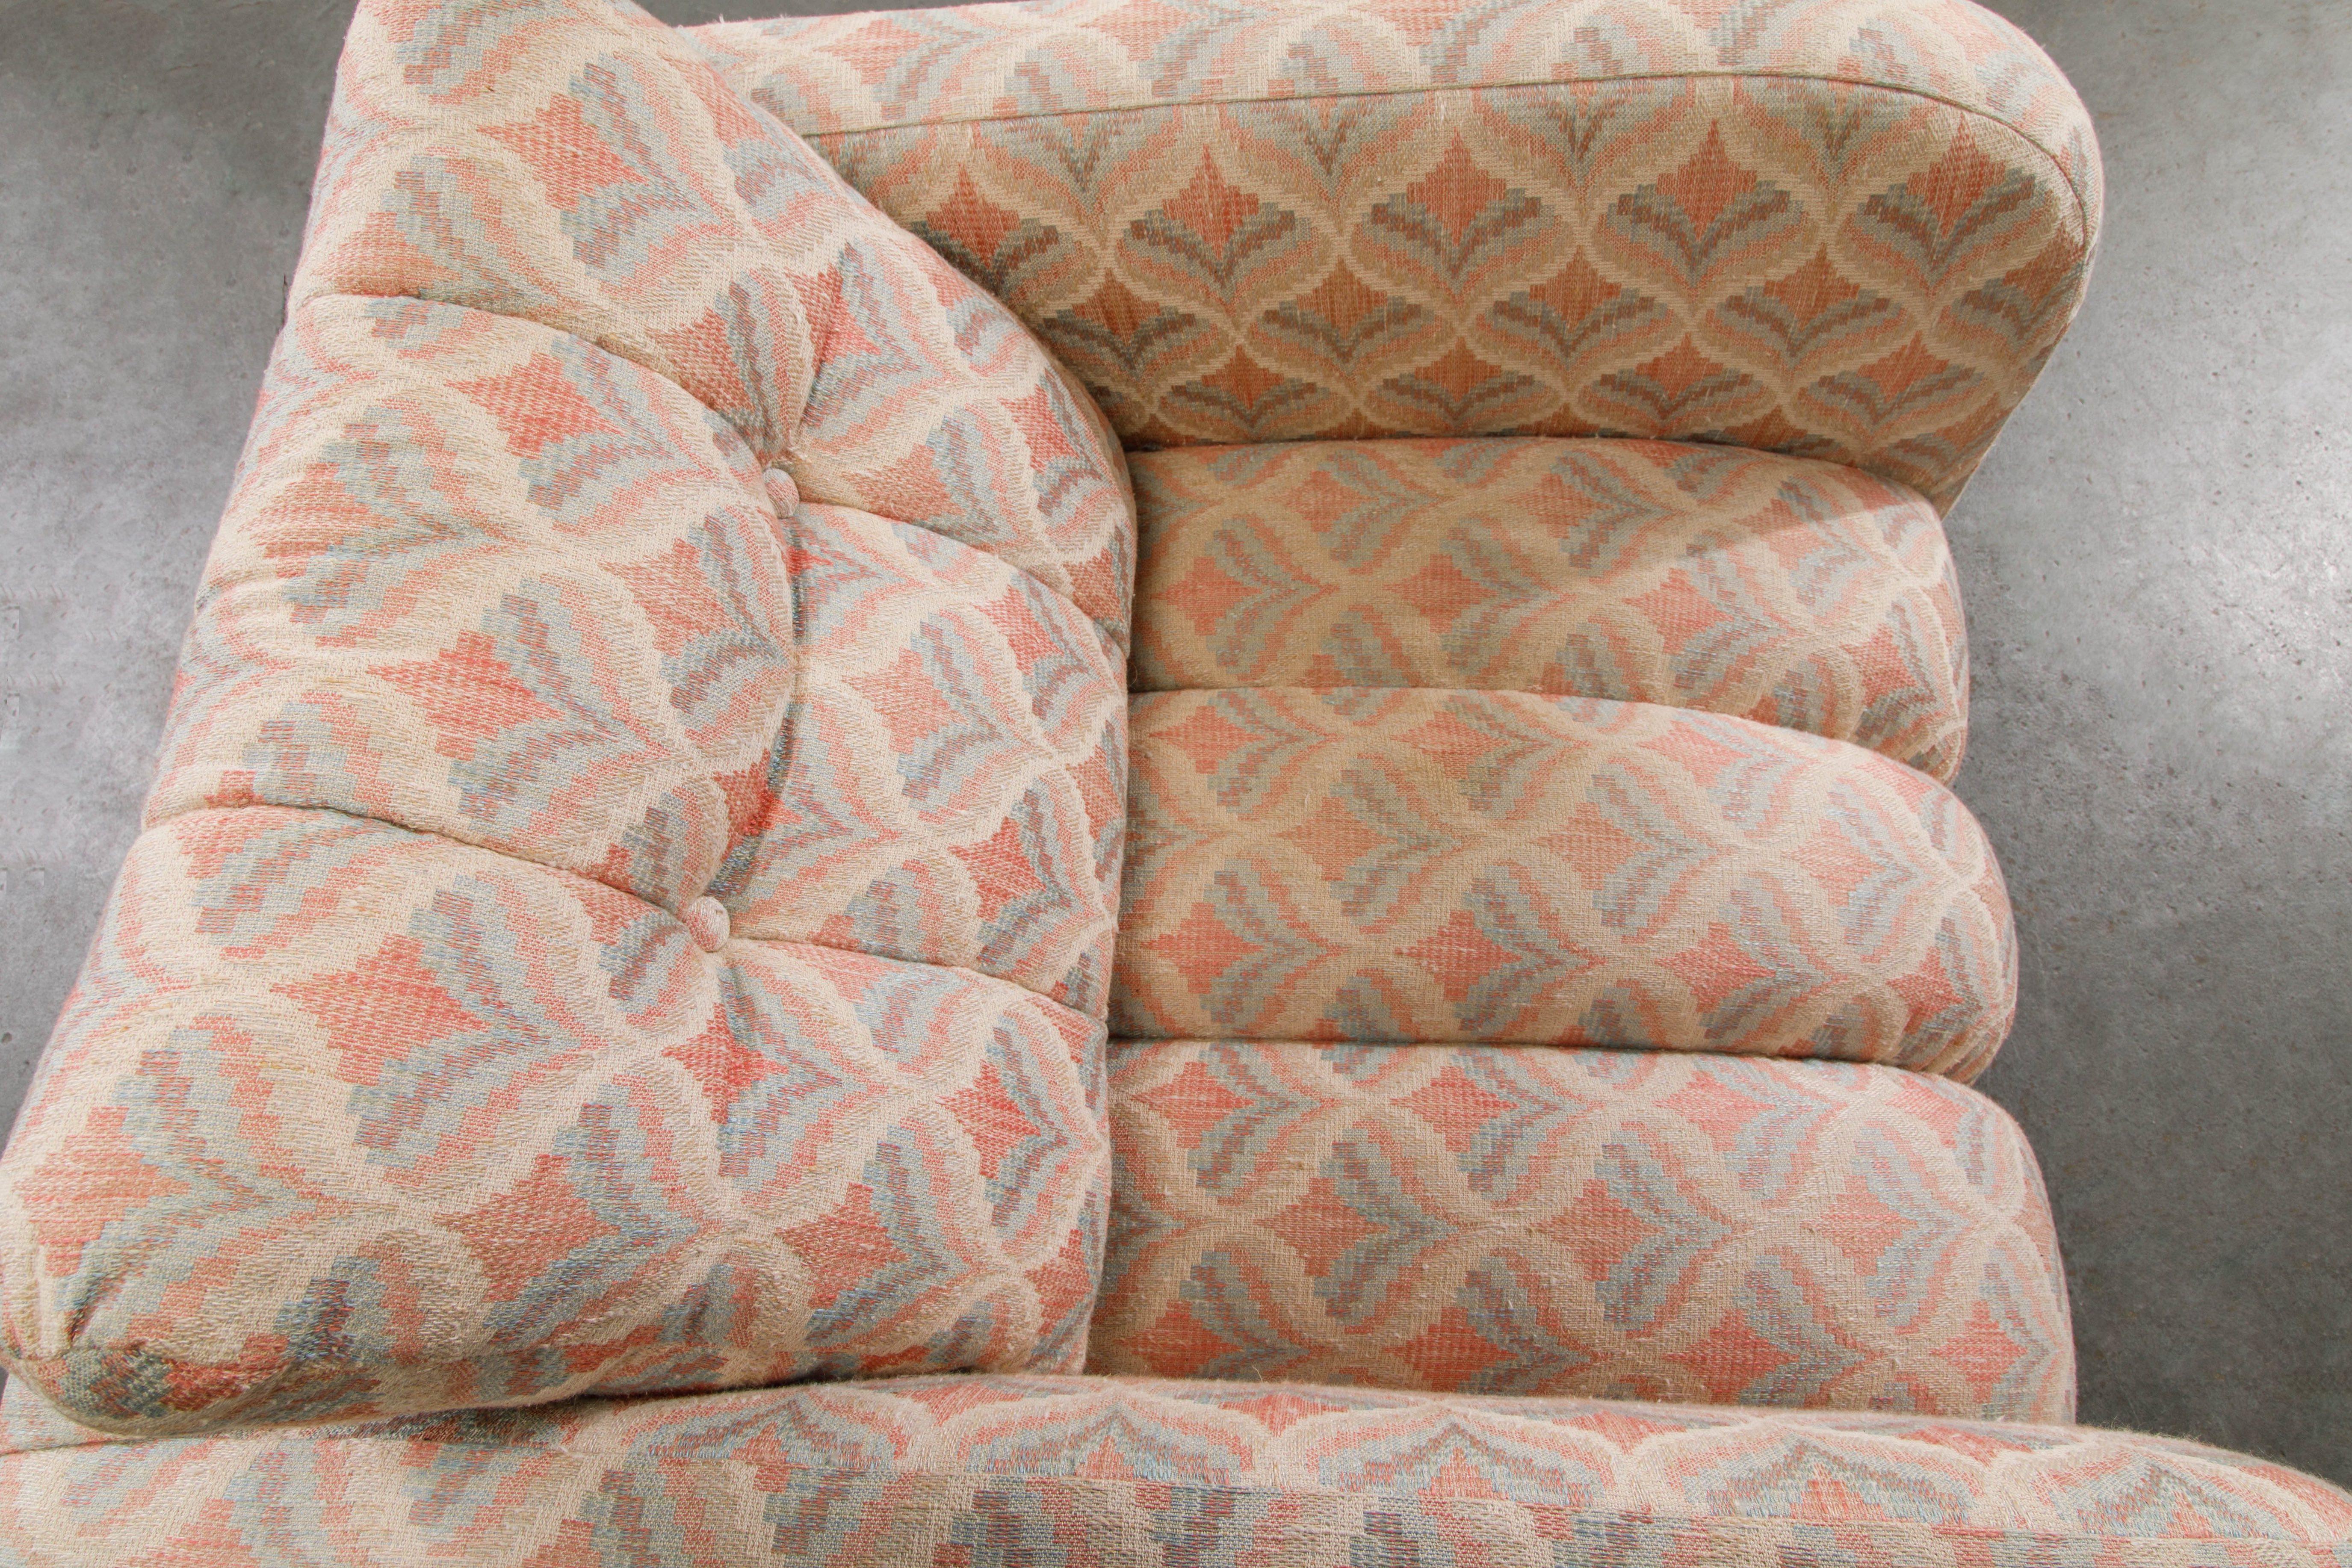 Post-Modern Channel Tufted Lounge Chairs, Attributed to Vladimir Kagan, 1980s For Sale 7